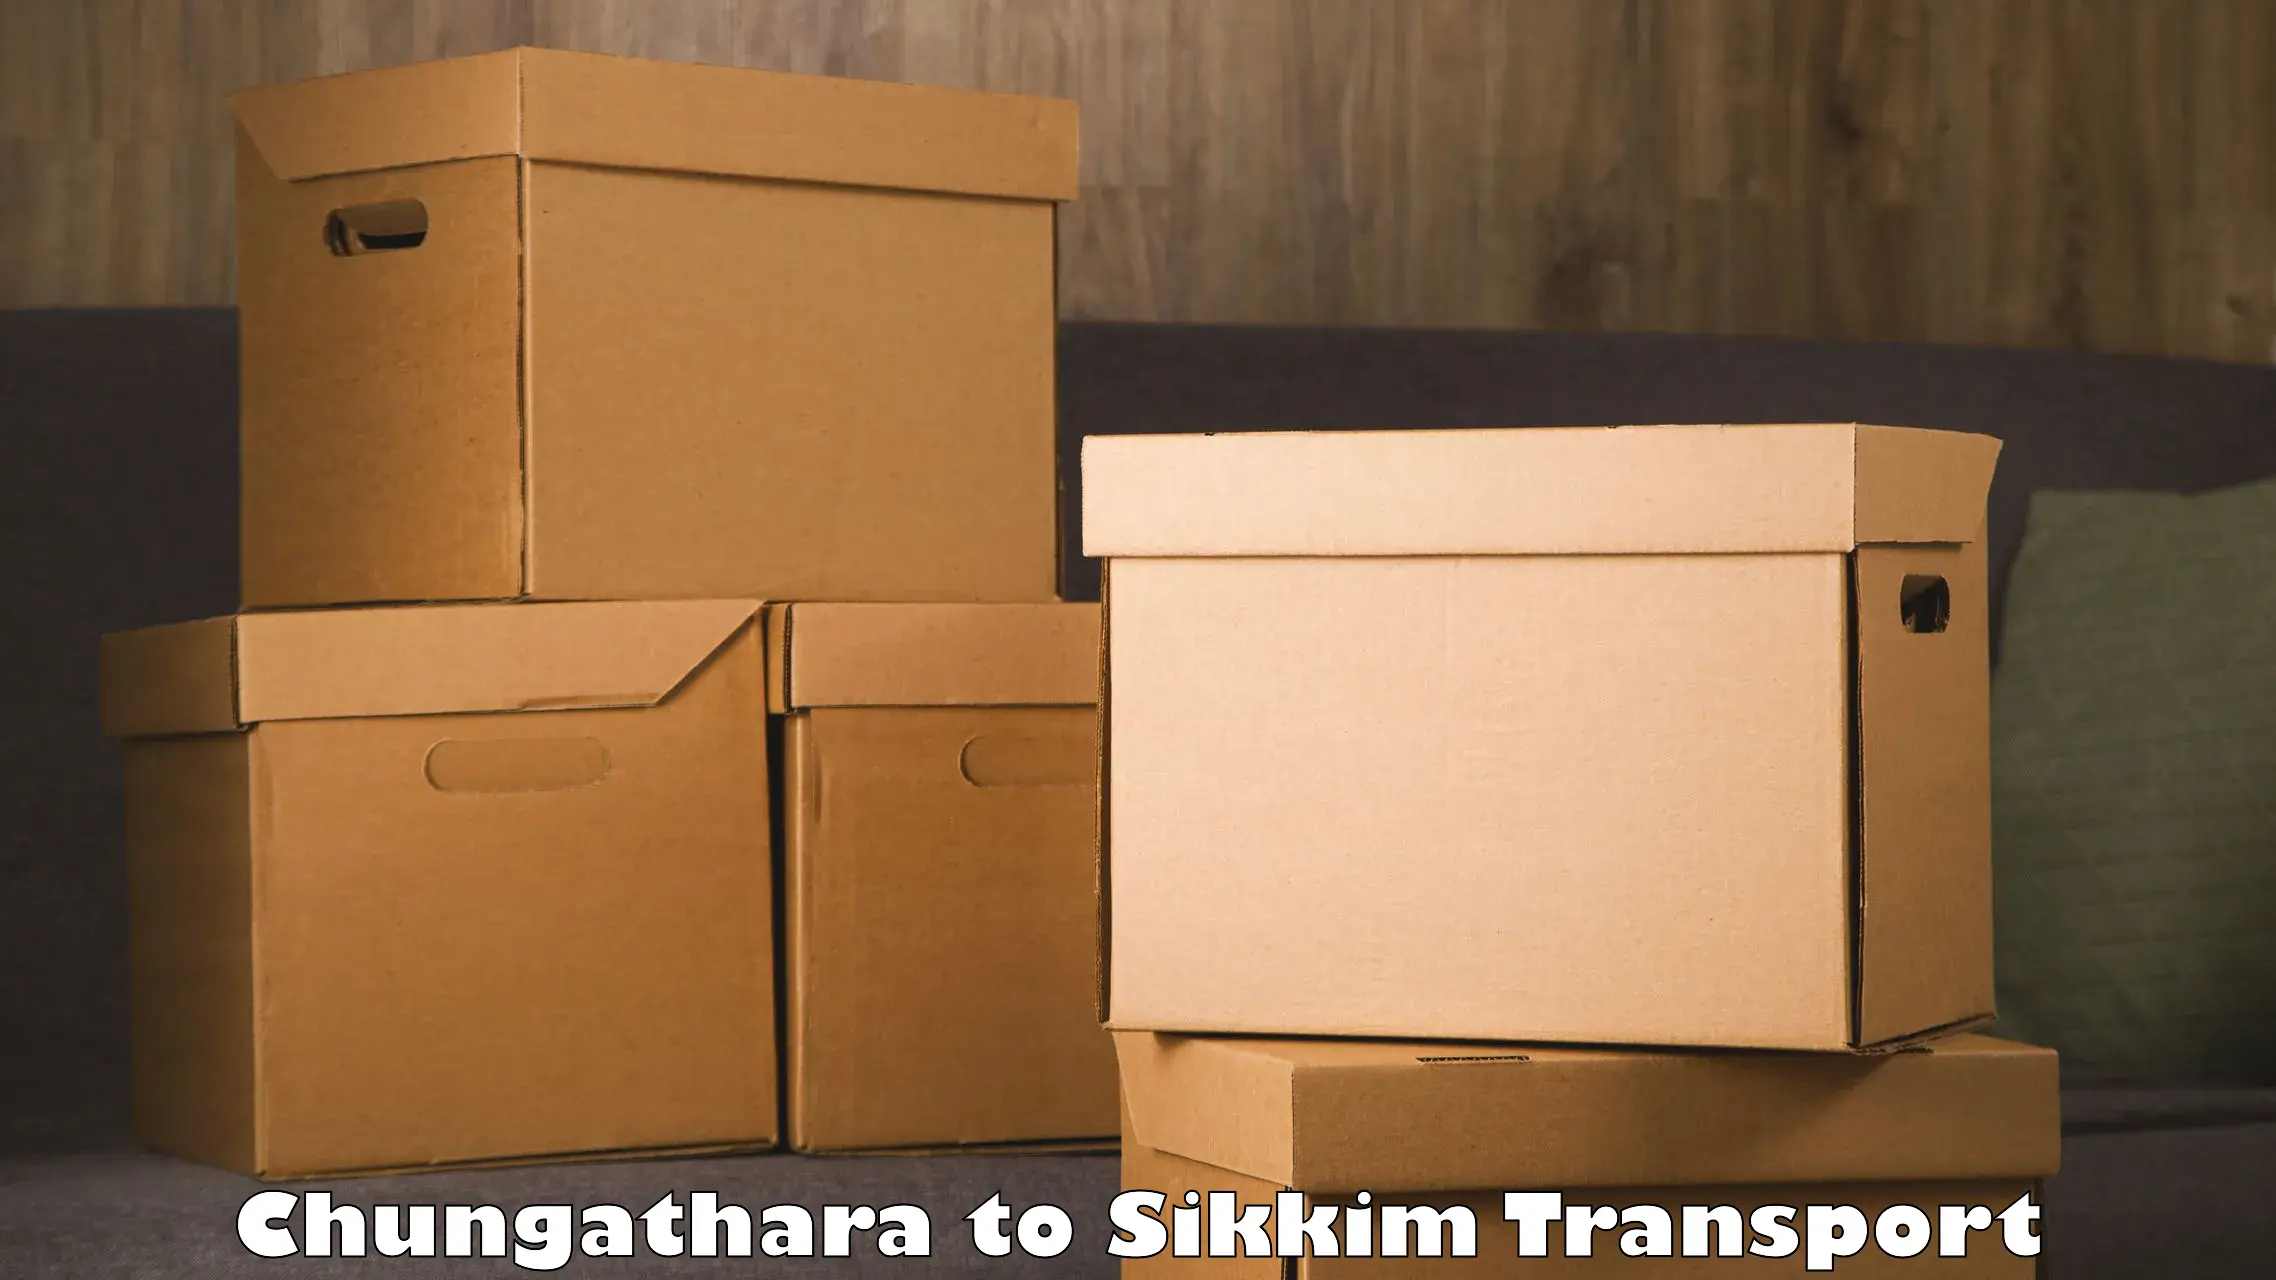 Container transport service Chungathara to Sikkim